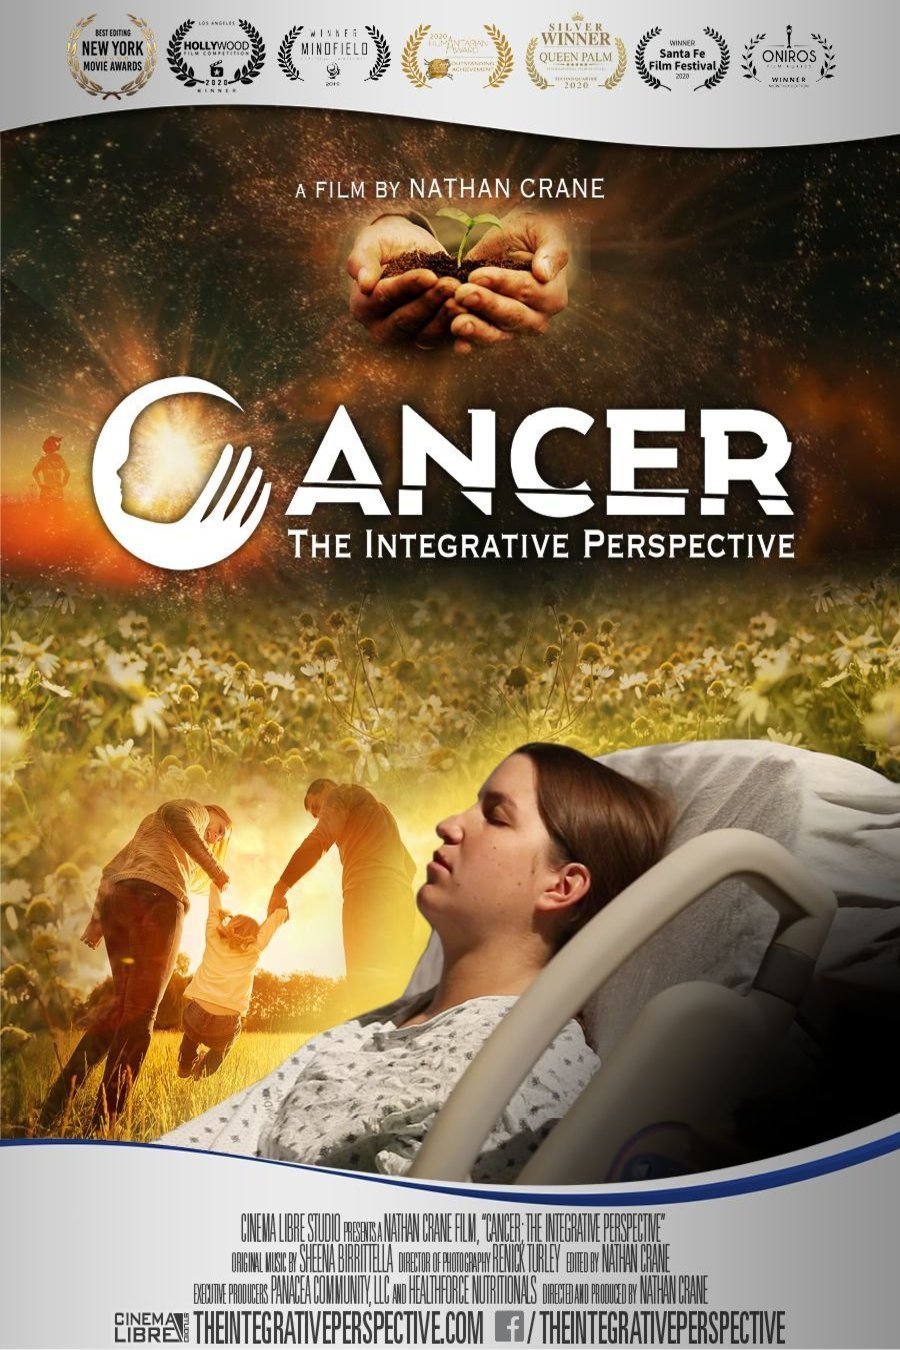 Poster of the movie Cancer; the Integrative Perspective